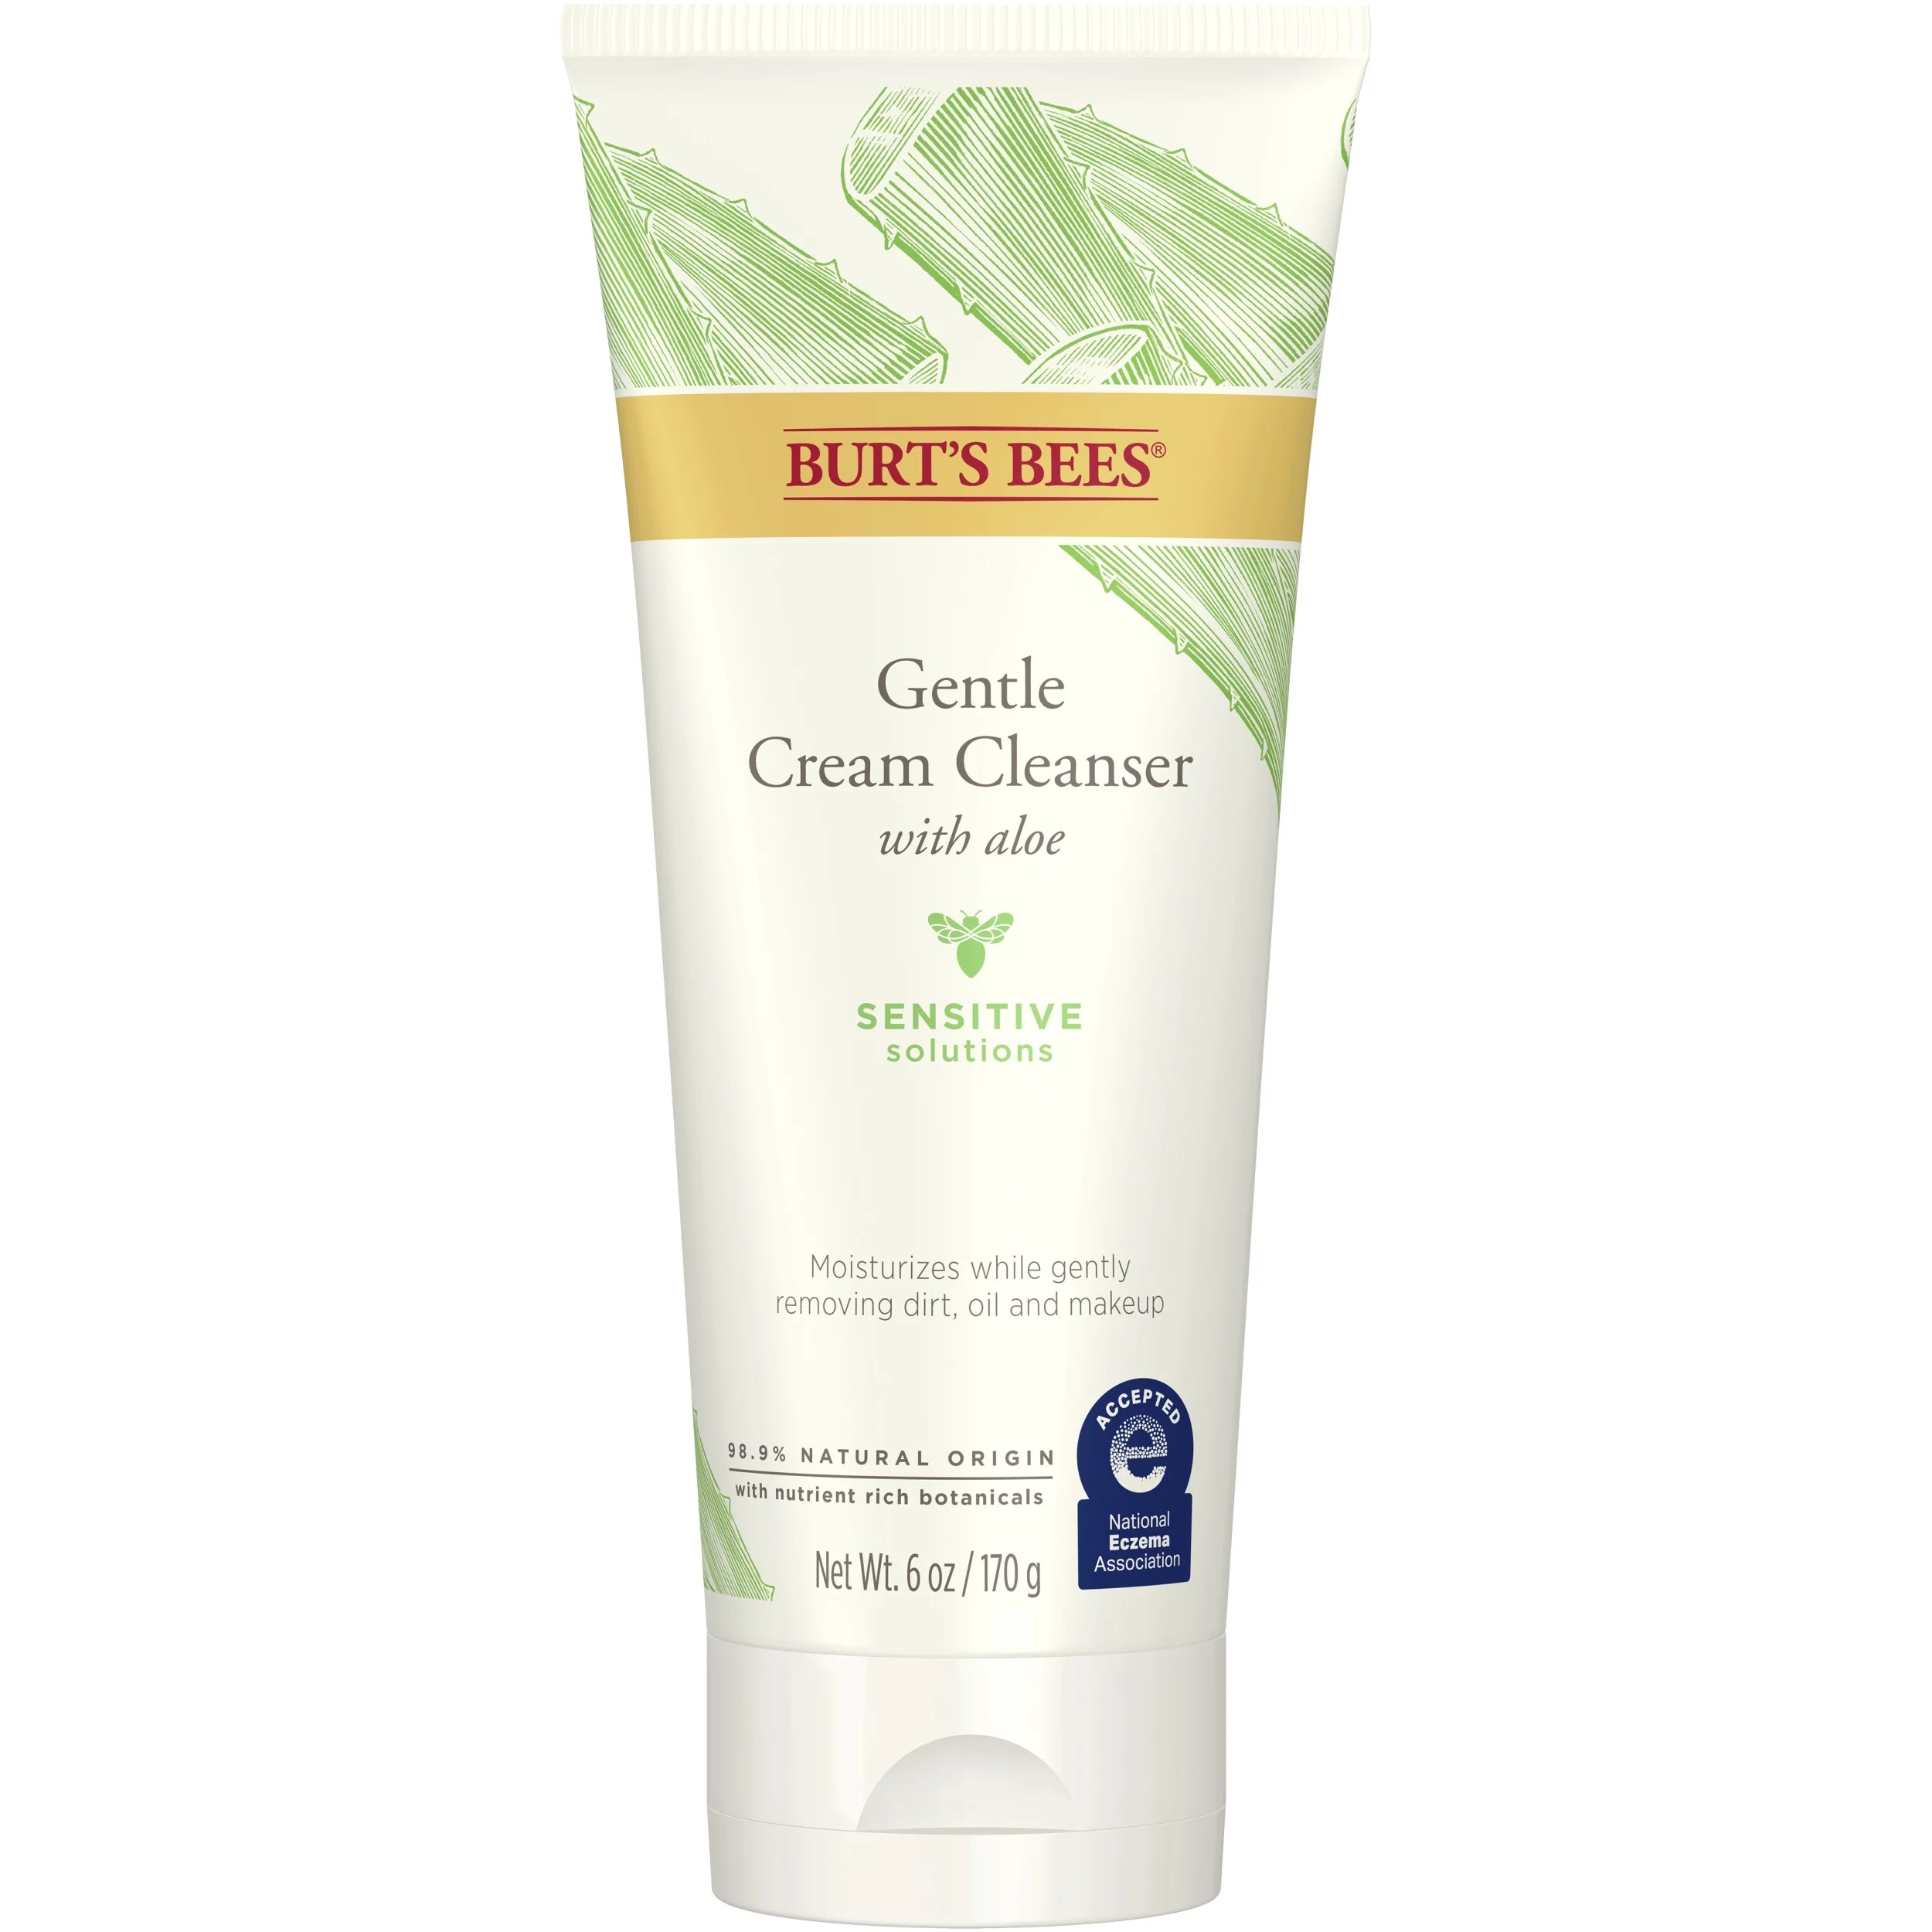 Burt's Bees Gentle Cream Cleanser with Aloe for Sensitive Skin, Face Cleanser, 6 oz